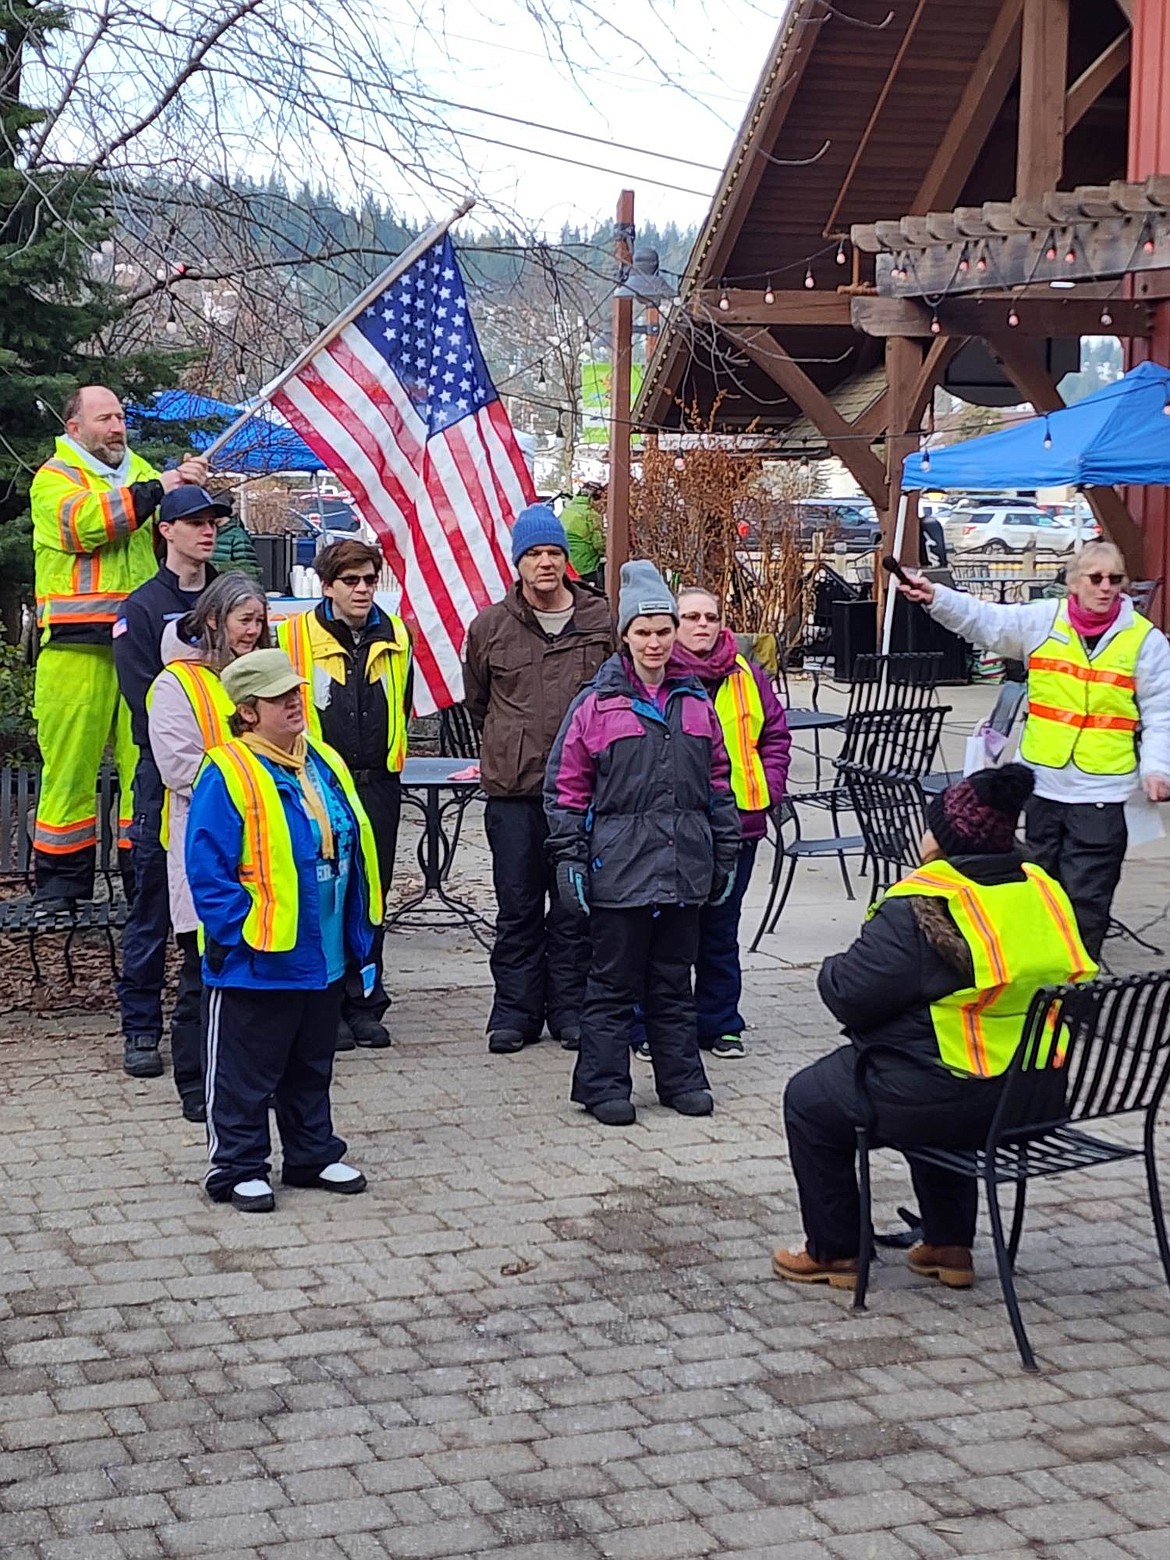 The Special Olympic athletes and volunteers gathered to say the Pledge Of Allegiance and sing the National Anthem before heading up the 3.1-mile-long gondola ride to Silver Mountain.